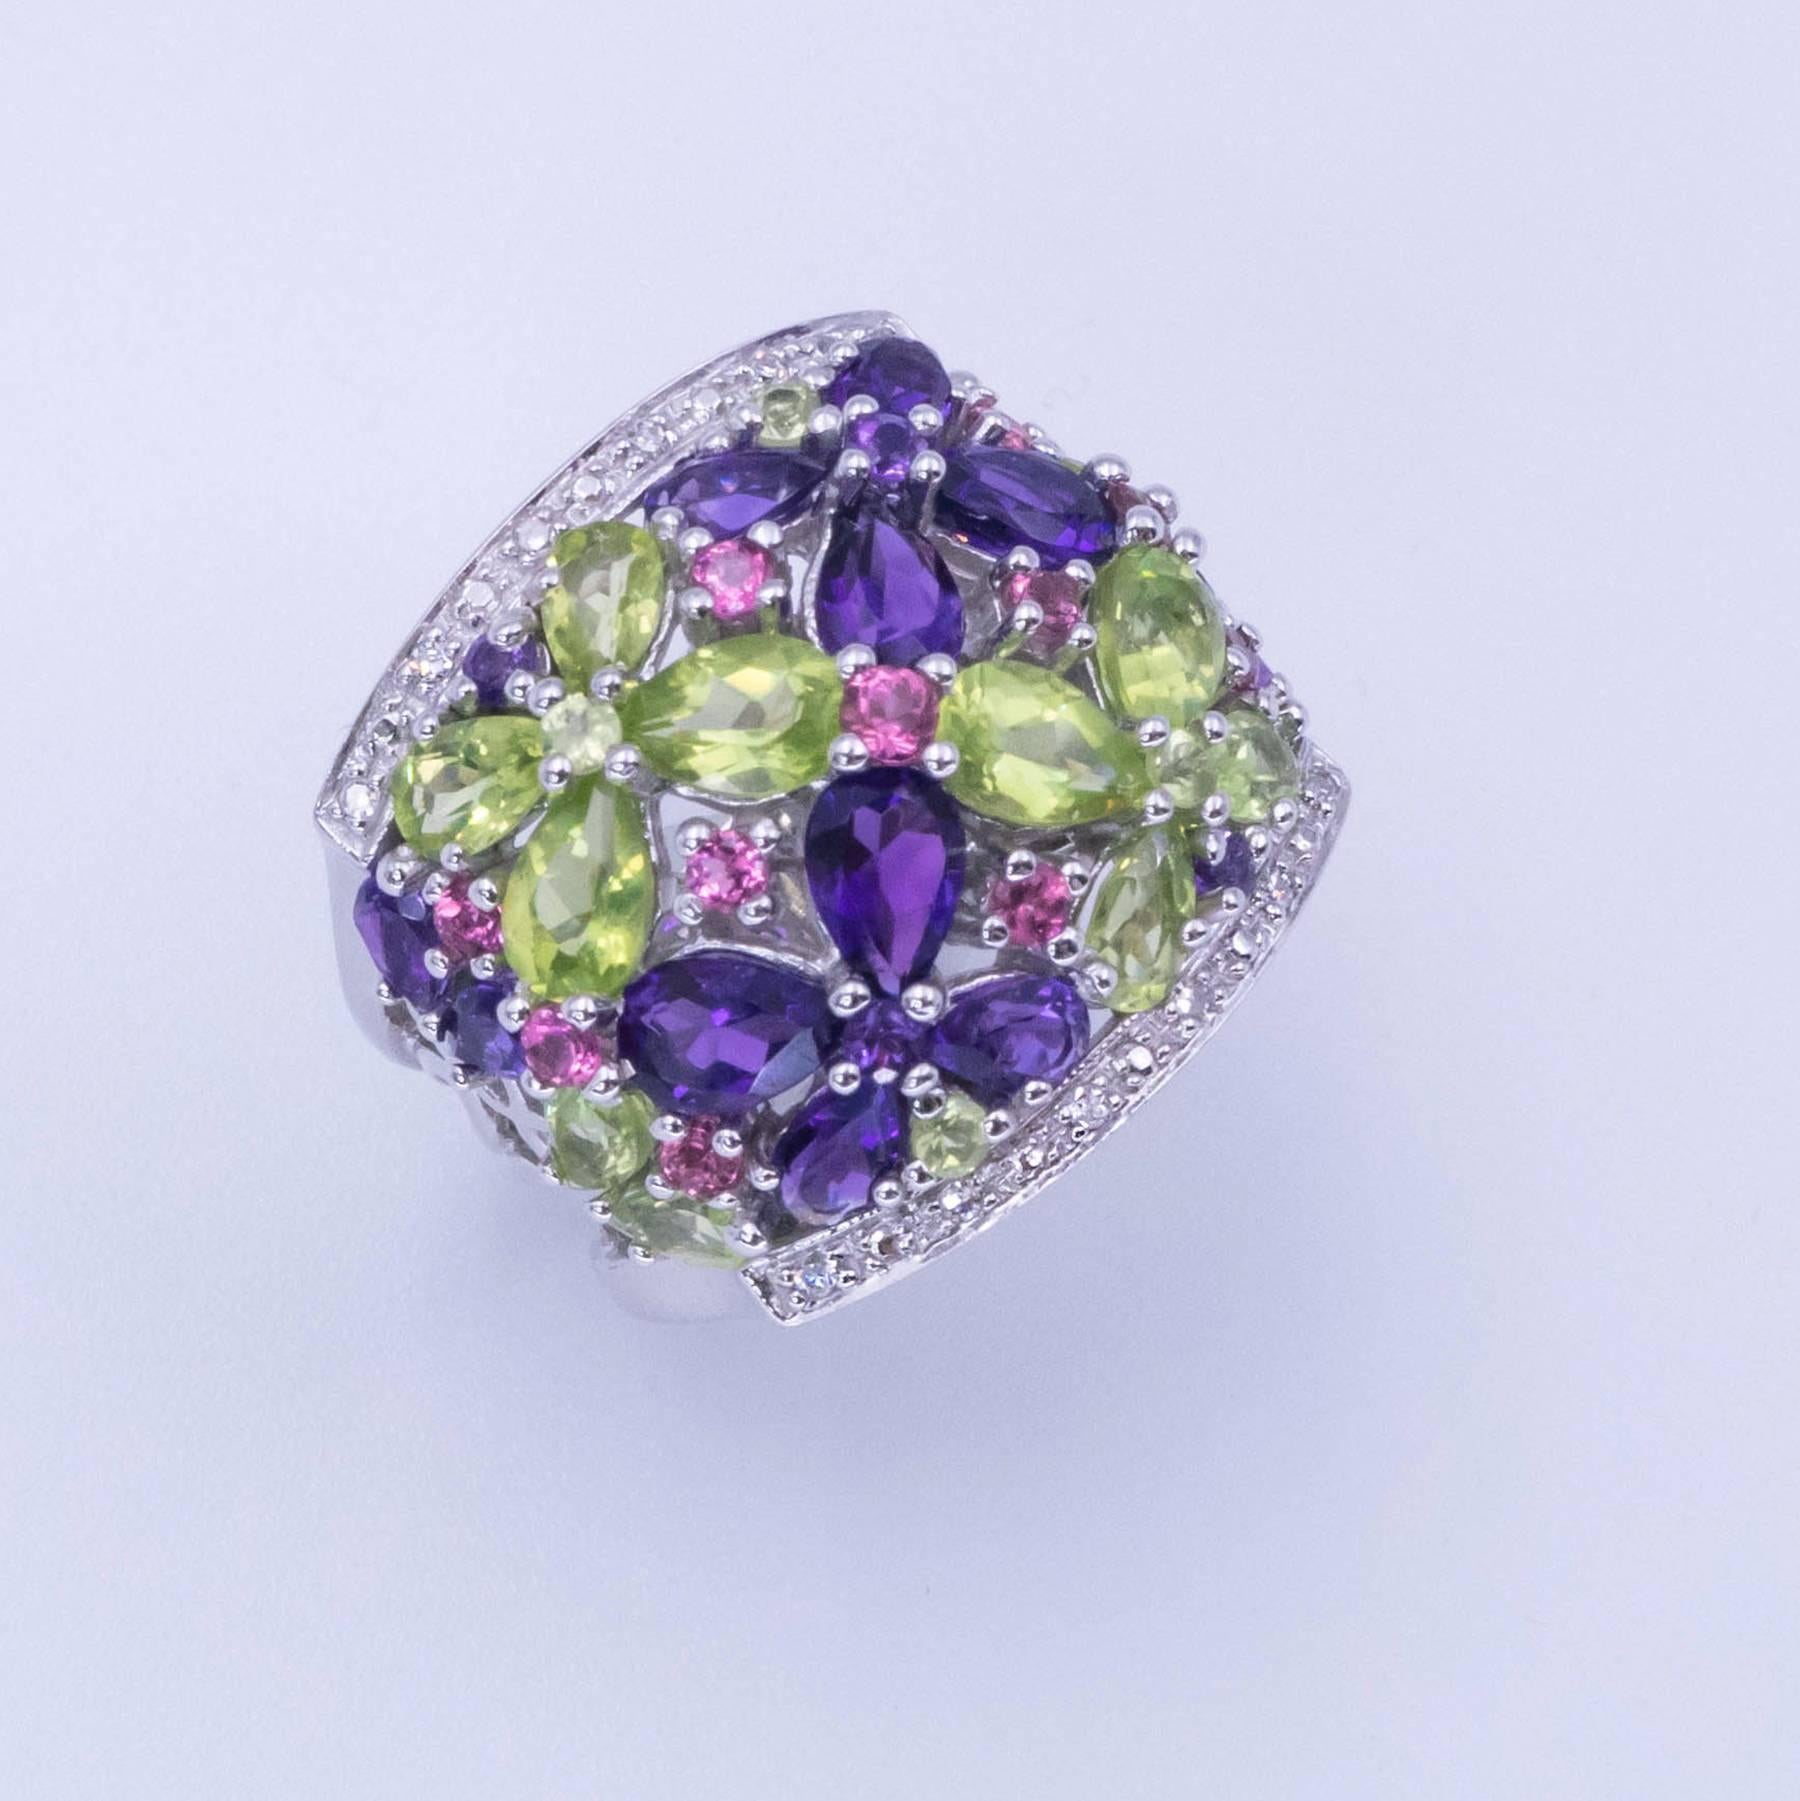 Sensational Amethyst Pink Tourmaline Peridot and Diamond Ring. This gorgeous wide band is set with Pear Cut Amethysts, Oval Cut Peridots, and Round Cut Pink Tourmalines and Diamonds depicting a stunning floral bouquet in a nicely detailed 14 karat